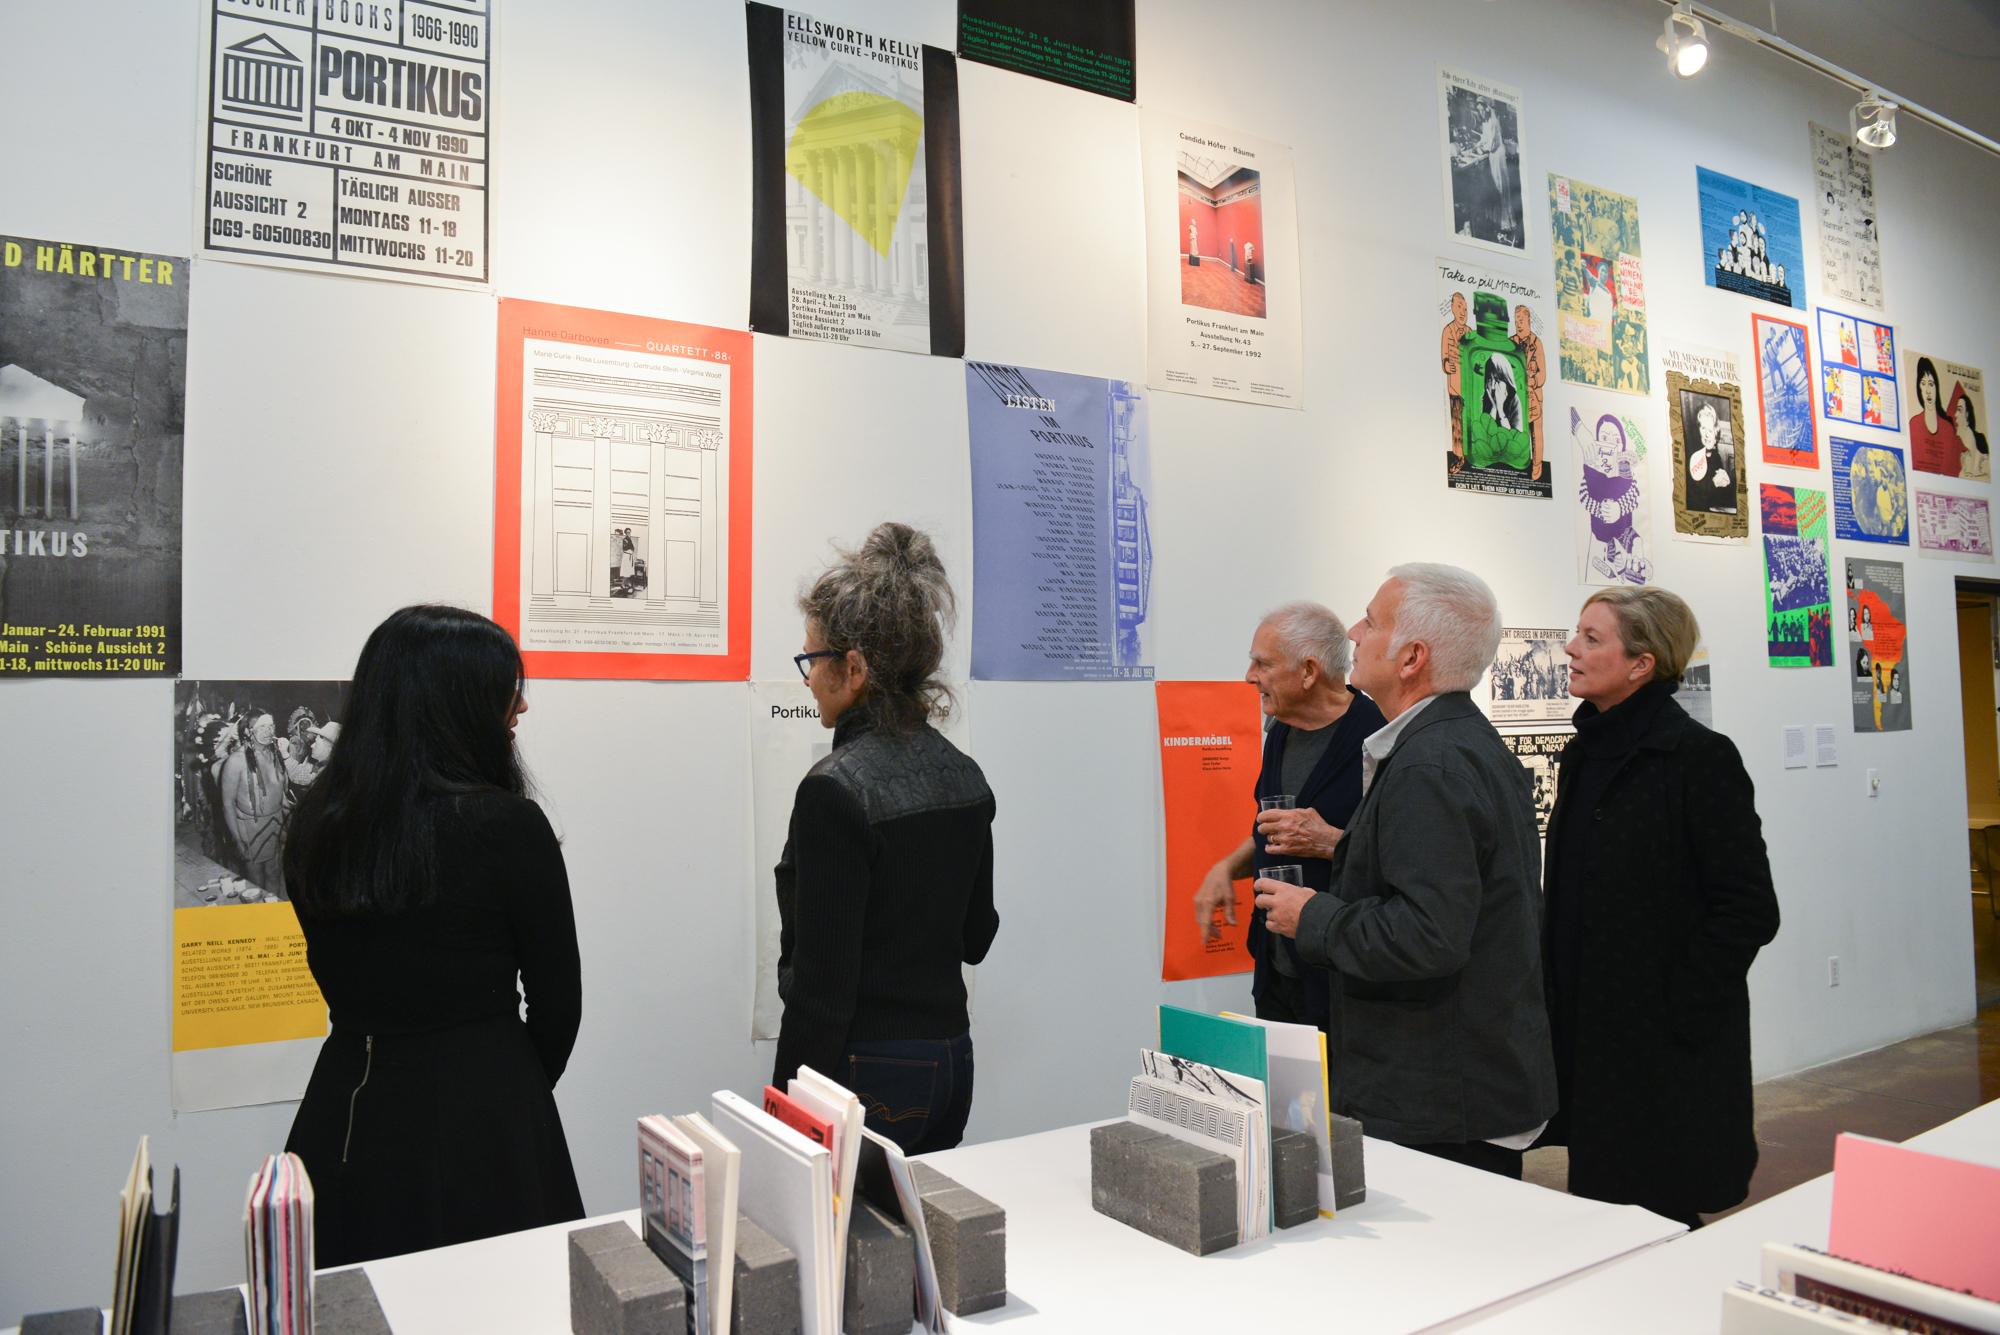 Cathy Busby + Garry Kennedy, ACTIVISM, ART EDUCATION AND PRINTED MATTER, organized by the Toronto Art Book Fair, at Grunt Gallery, Vancouver, 2017